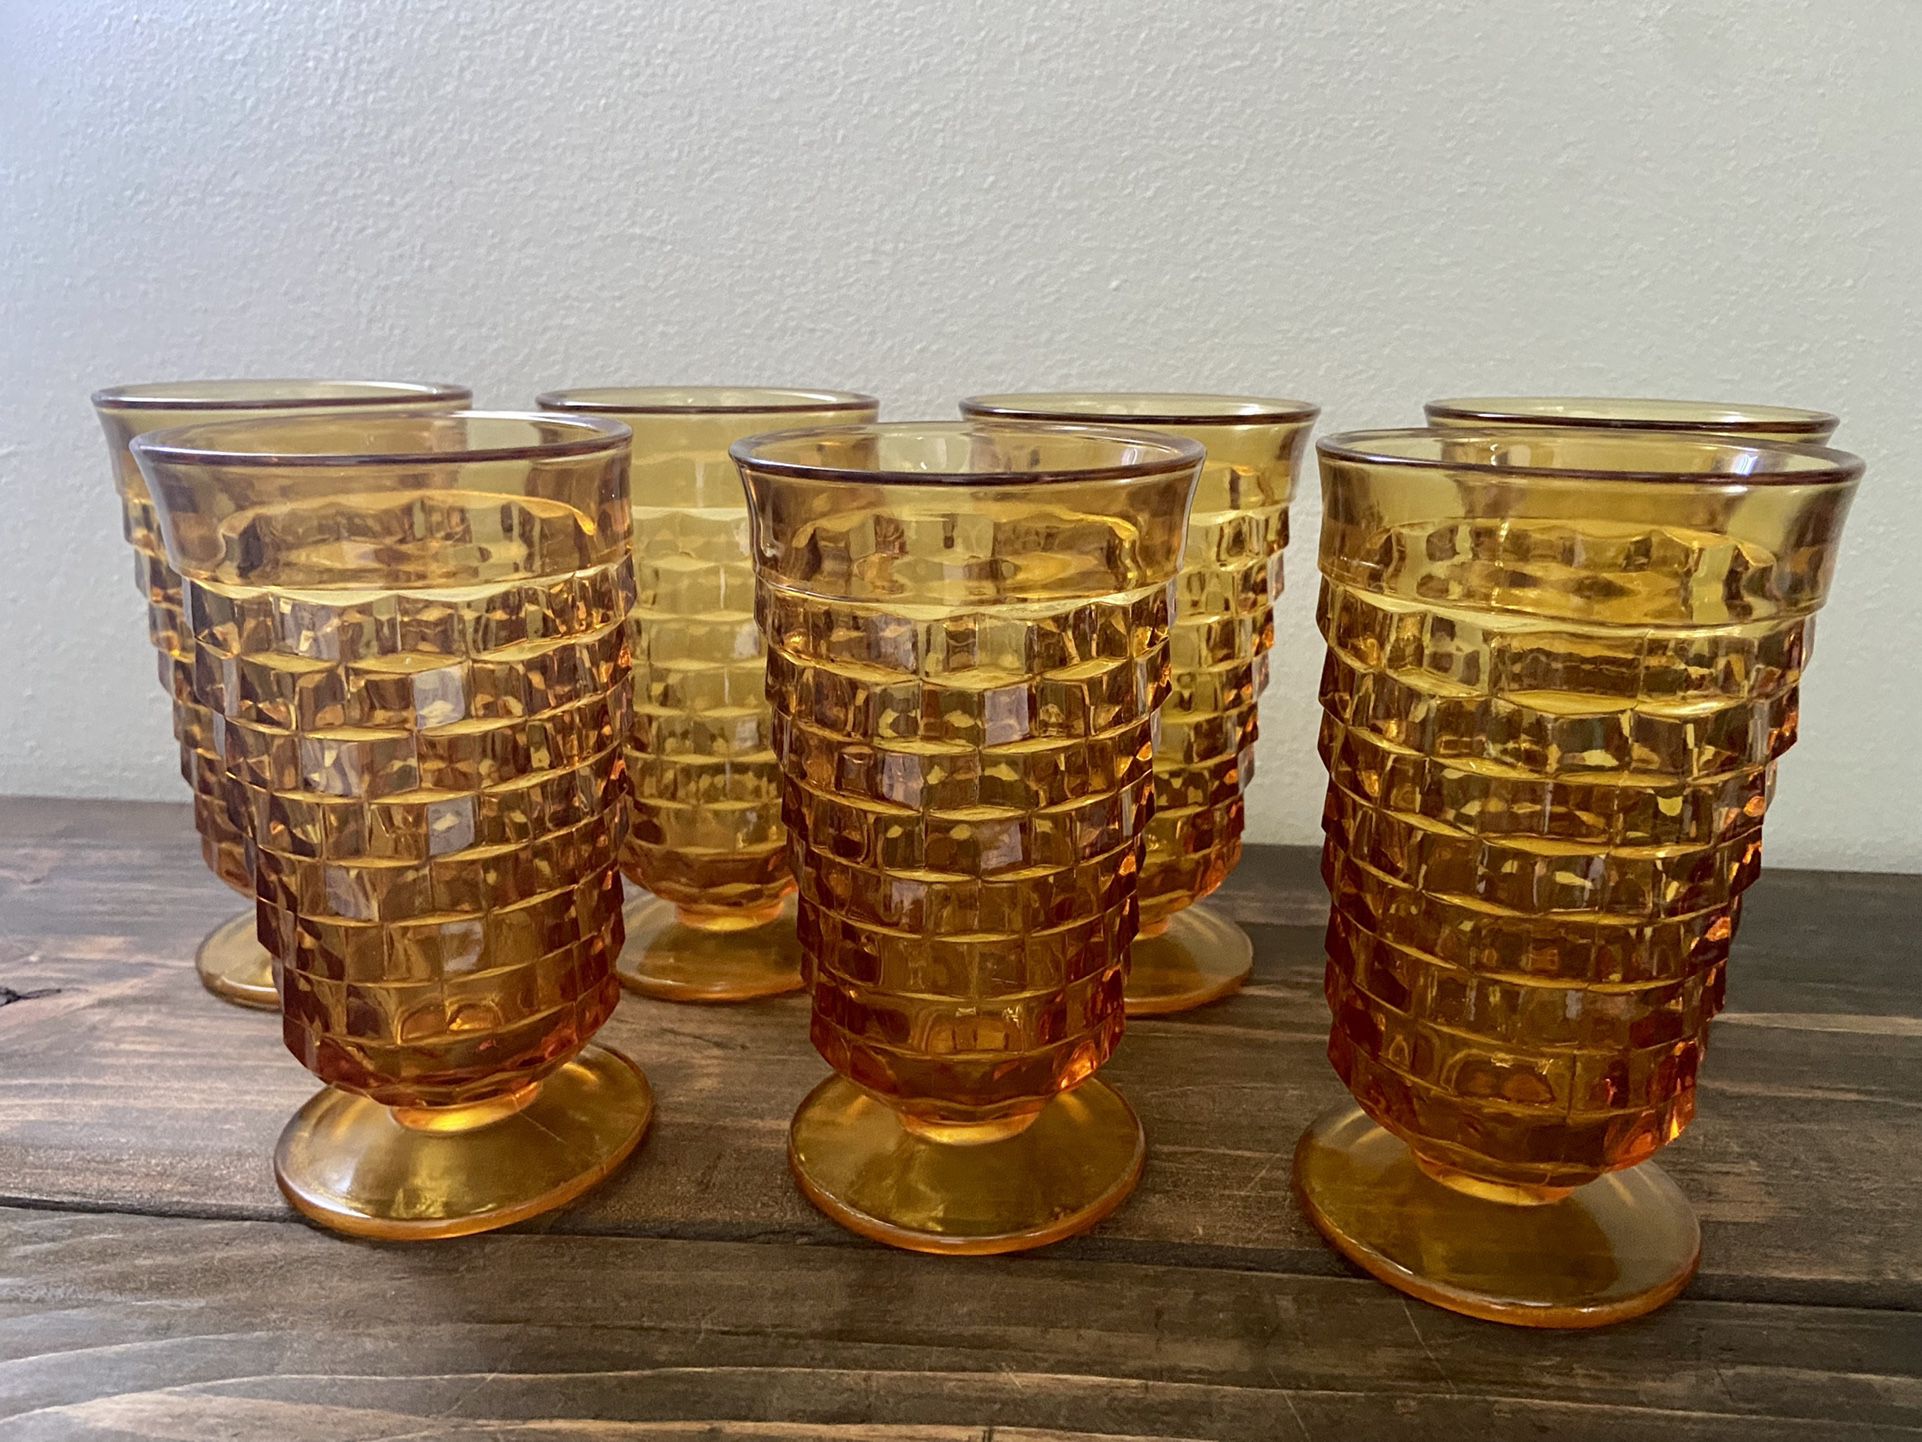 Vintage MCM Indiana Glass “Whitehall” Footed Amber Glass Tumblers Set Of 7